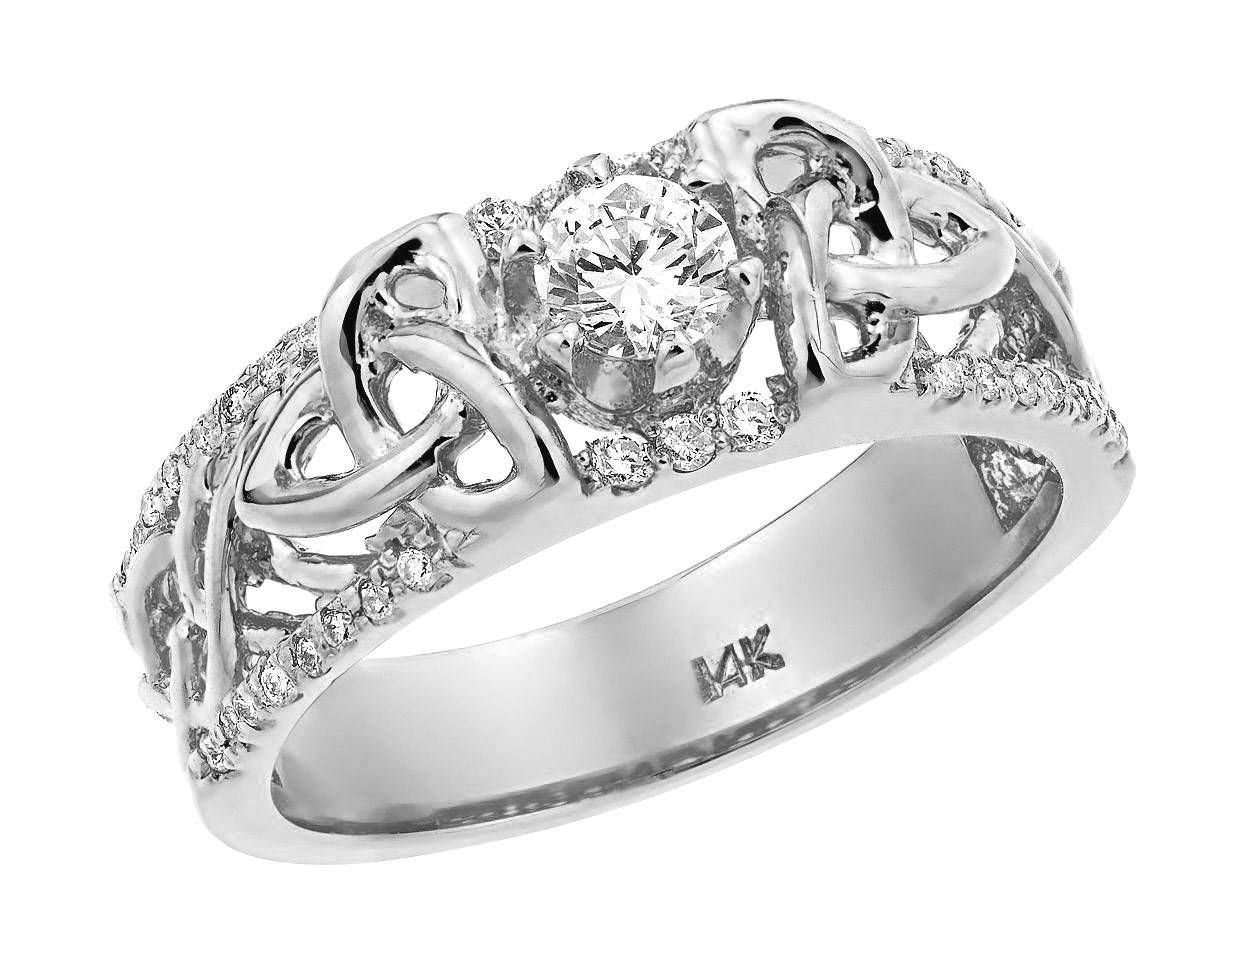 Jewelry Rings: Exceptional Irish Weddinggs Photos Design Claddagh Throughout Celtic Engagement Rings Canada (View 6 of 15)